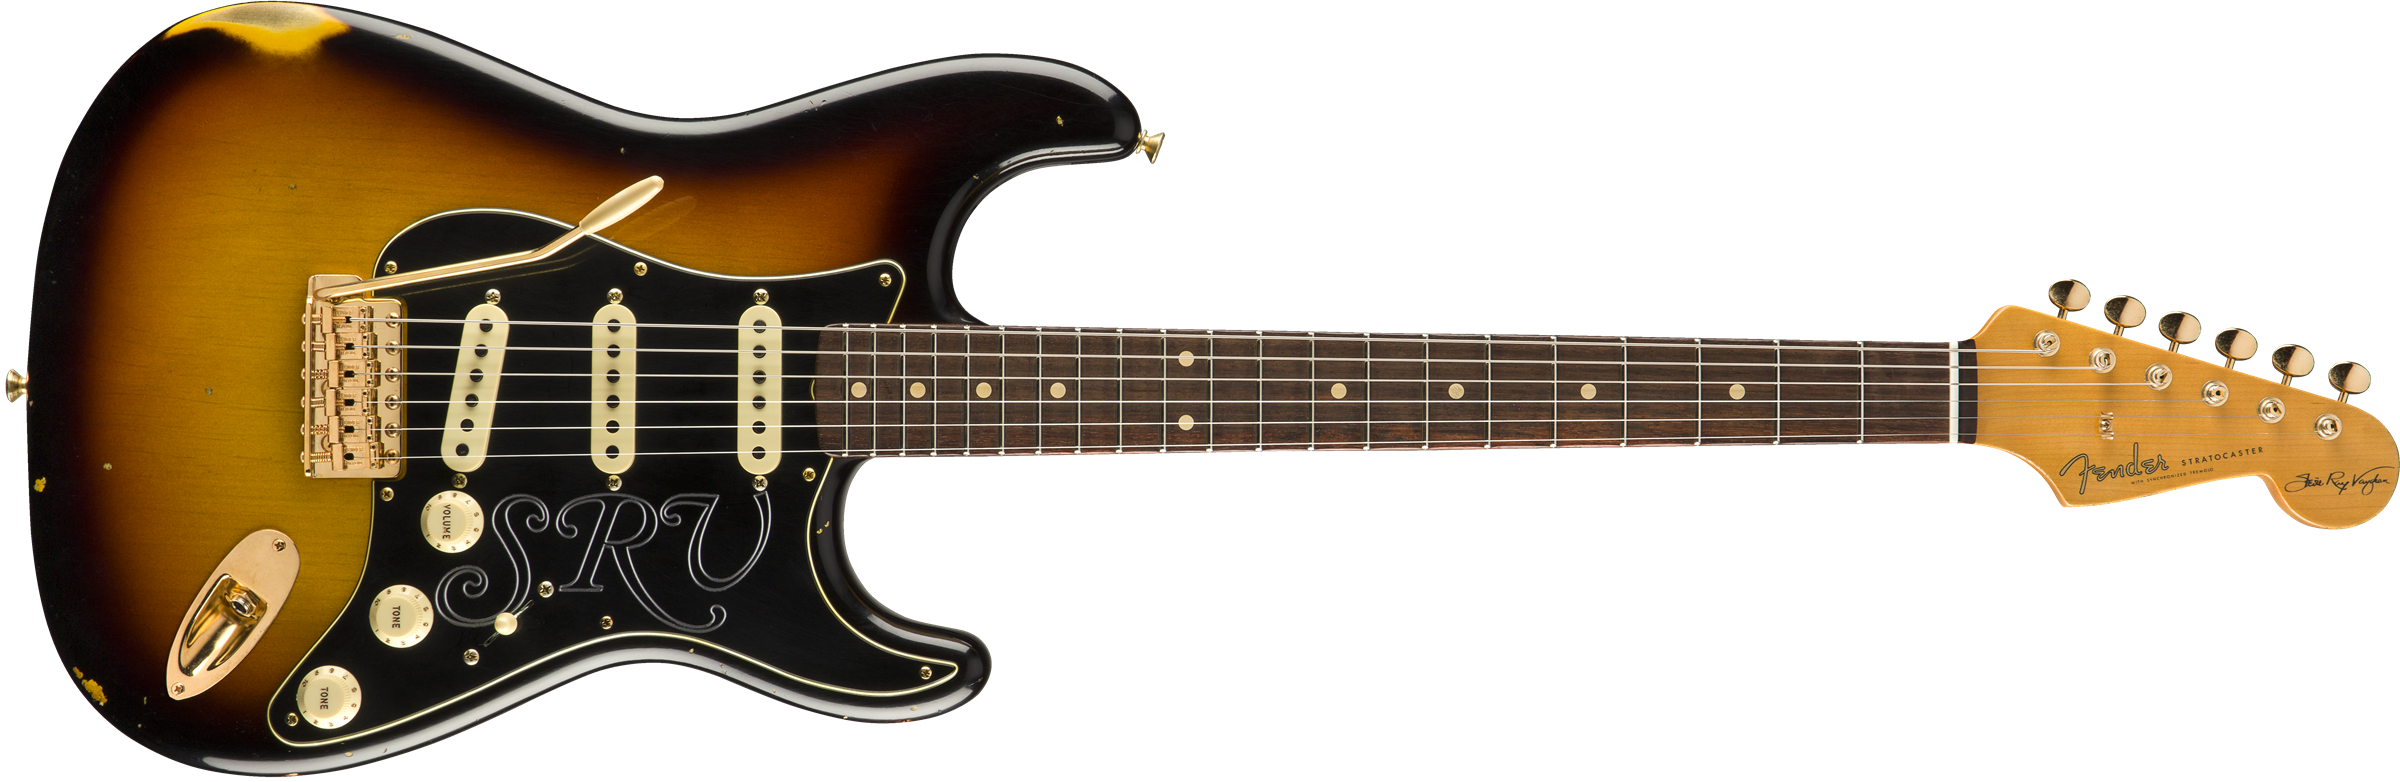 Fender Custom Shop SRV Stevie Ray Vaughan Signature Stratocaster Relic with Closet Classic Hardware, Rosewood Fingerboard, Faded 3-Color Sunburst 9235001087 SERIAL NUMBER CZ566267 - 7.6 LBS